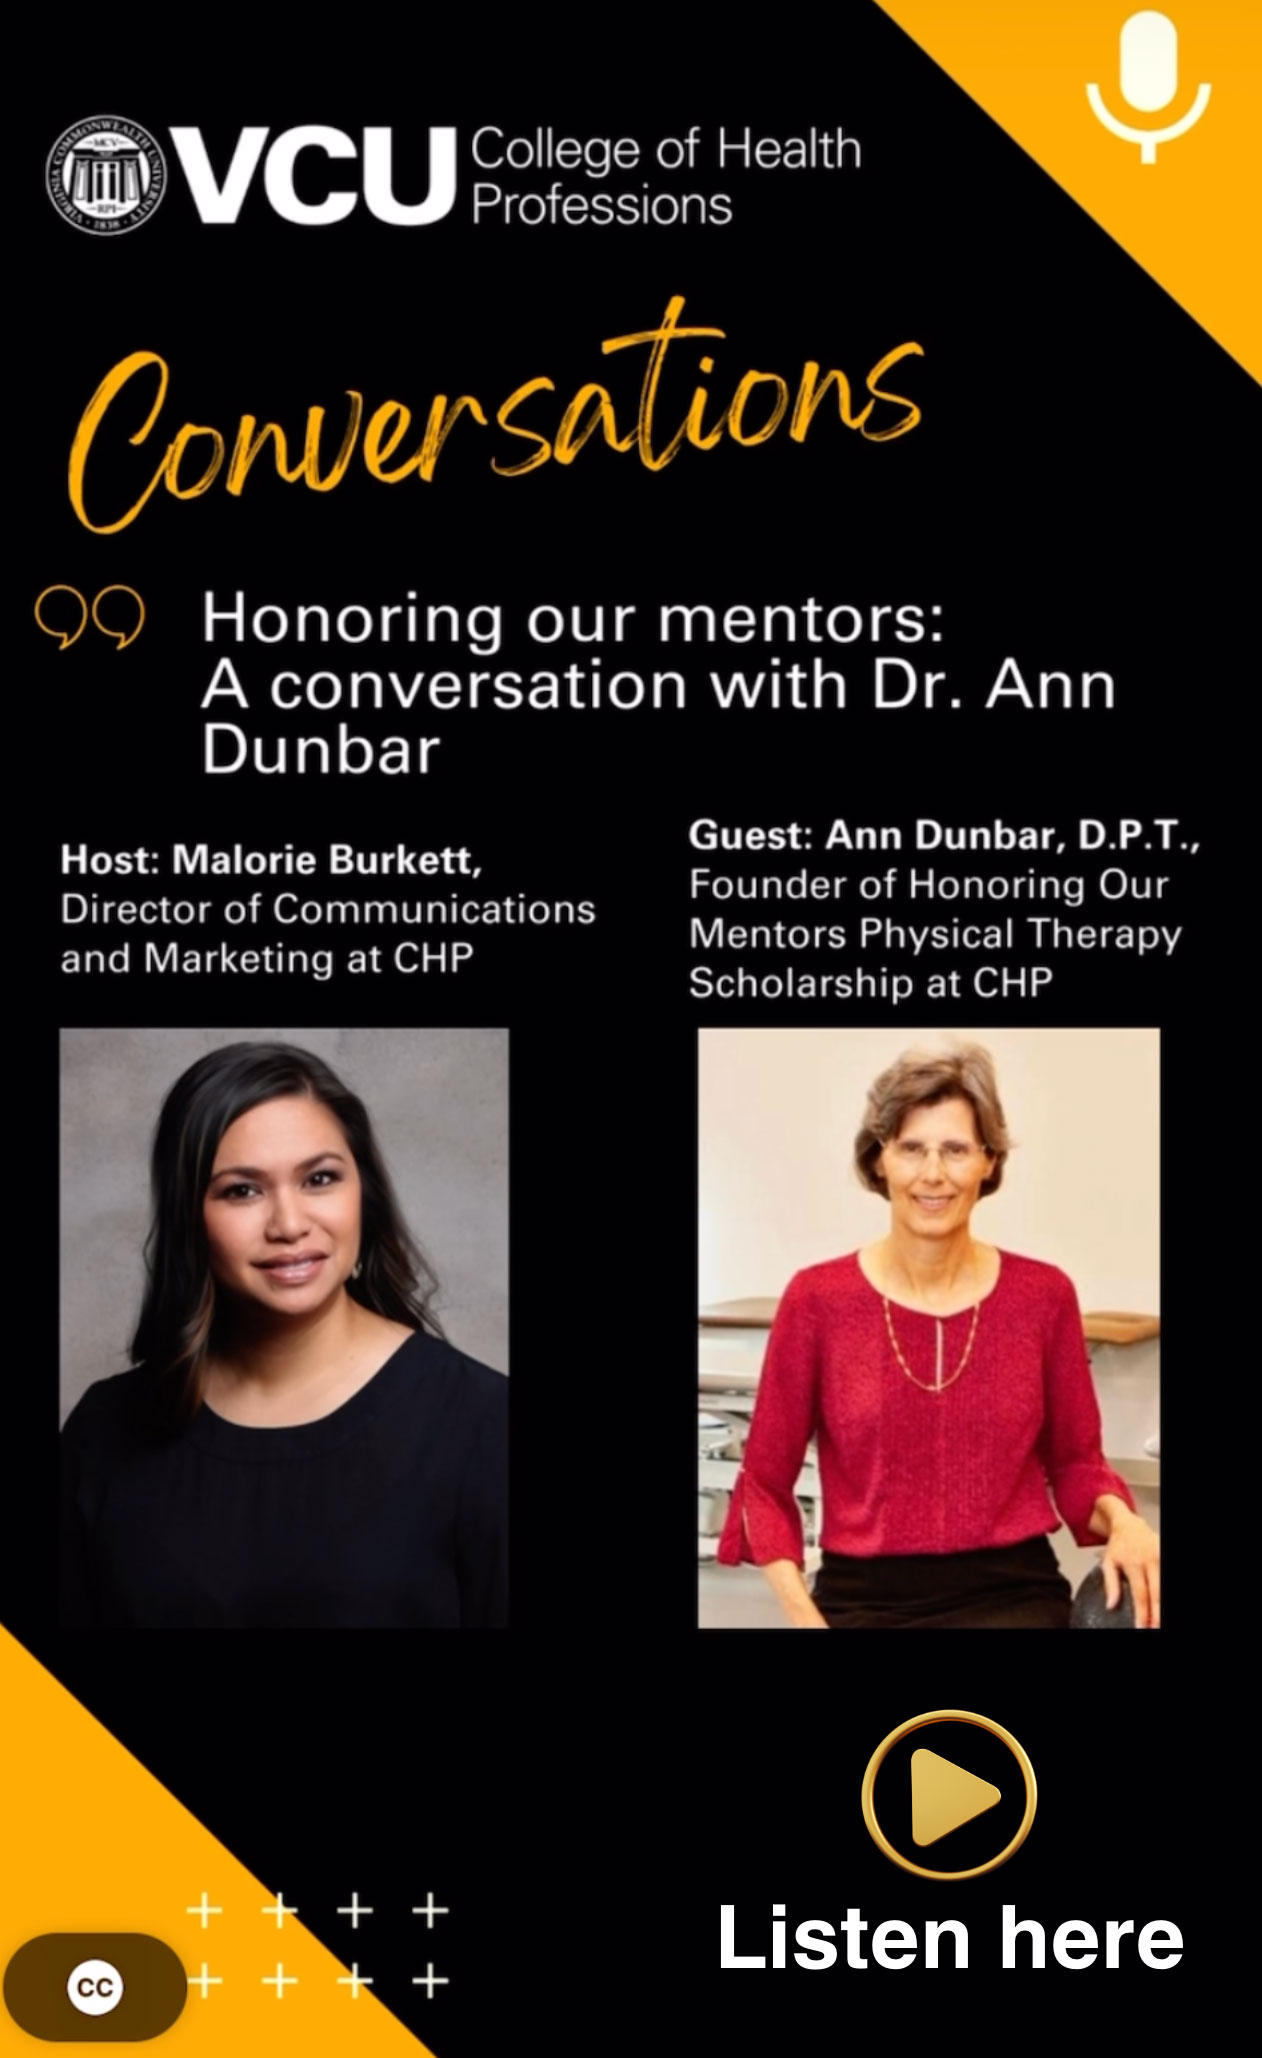 CHP Conversations Honoring our mentors A Conversation with Dr Ann Dunbar host: Malorie Burkett, Director of Communications and Marketing at CHP with Guest: Ann Dunbar DPT Founder of Honoring our Mentors Physical Therapy Scholarship at CHP